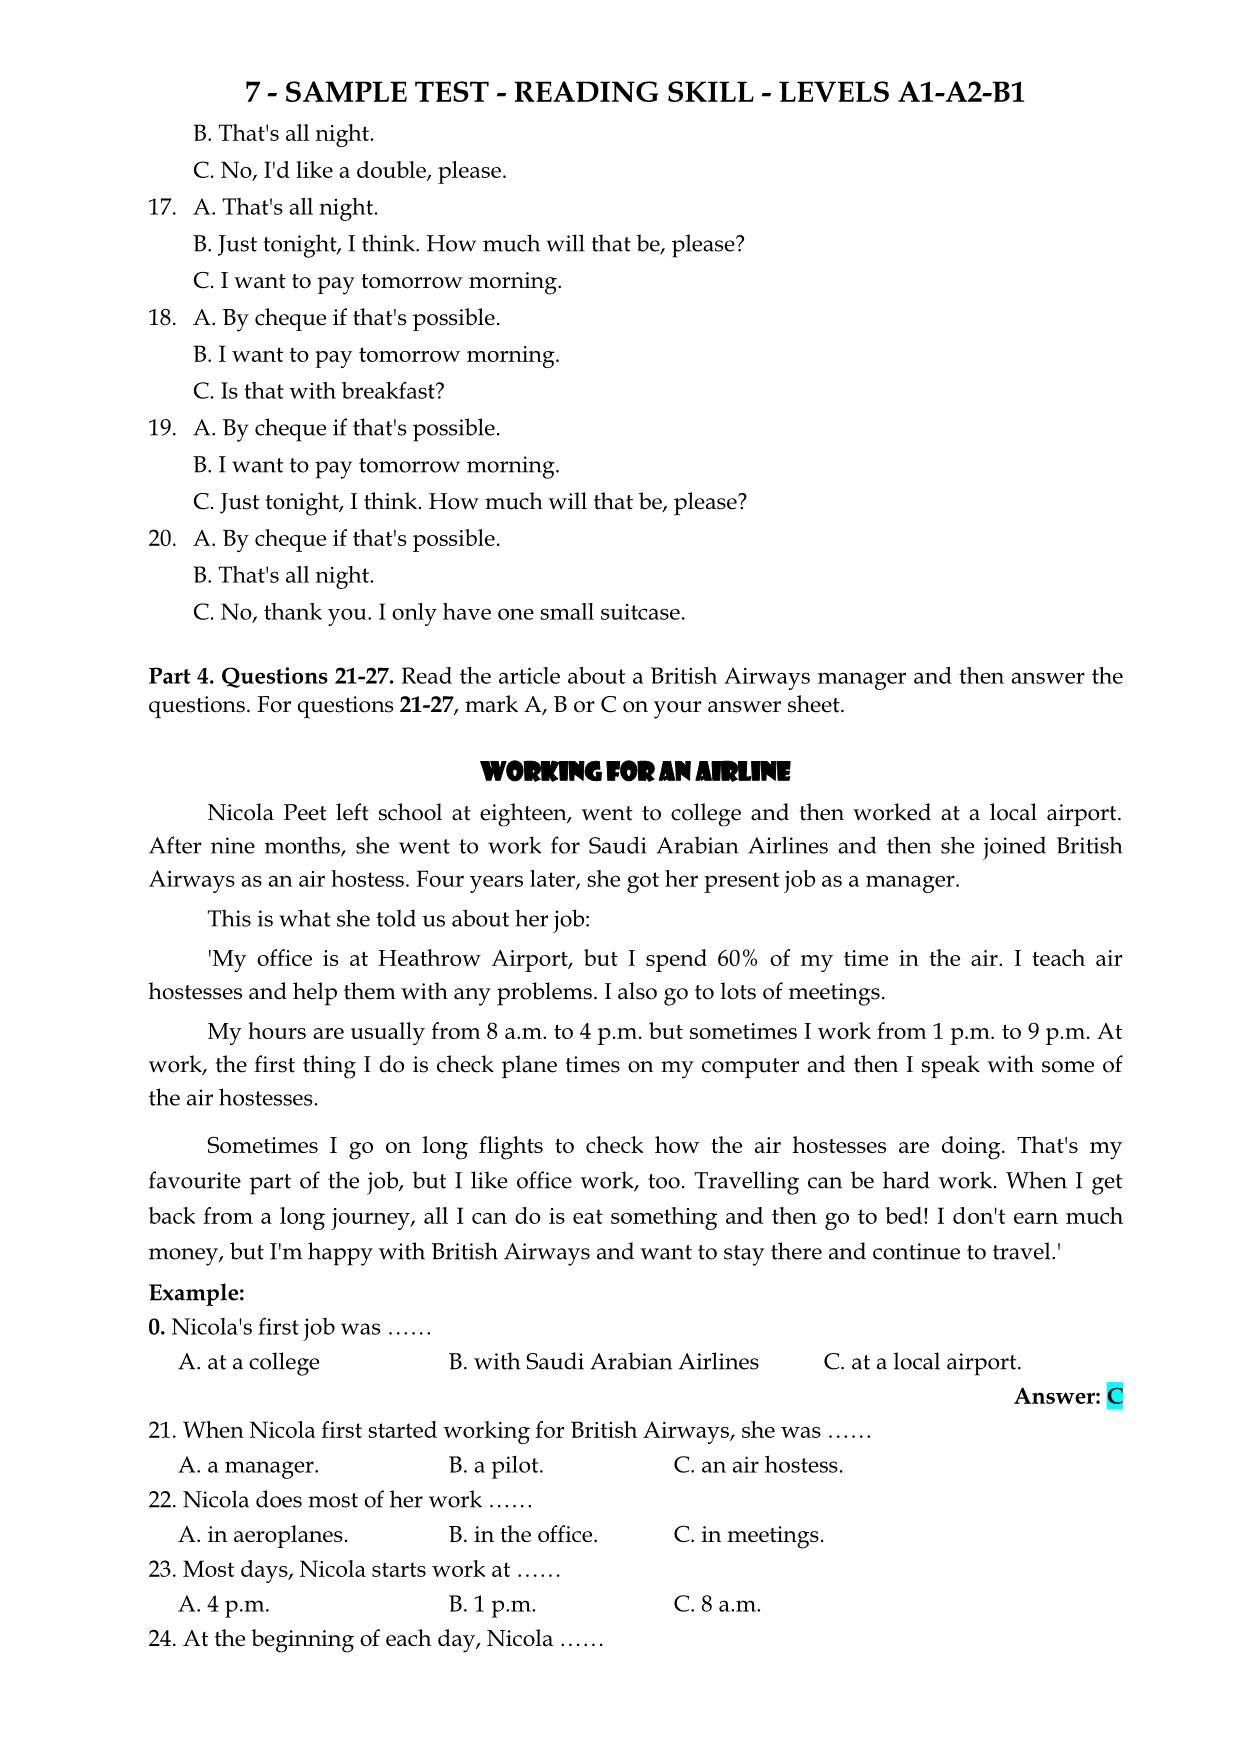 Tiếng Anh - Sample test - Reading skill - Levels  A1 - A2 - B1 trang 9